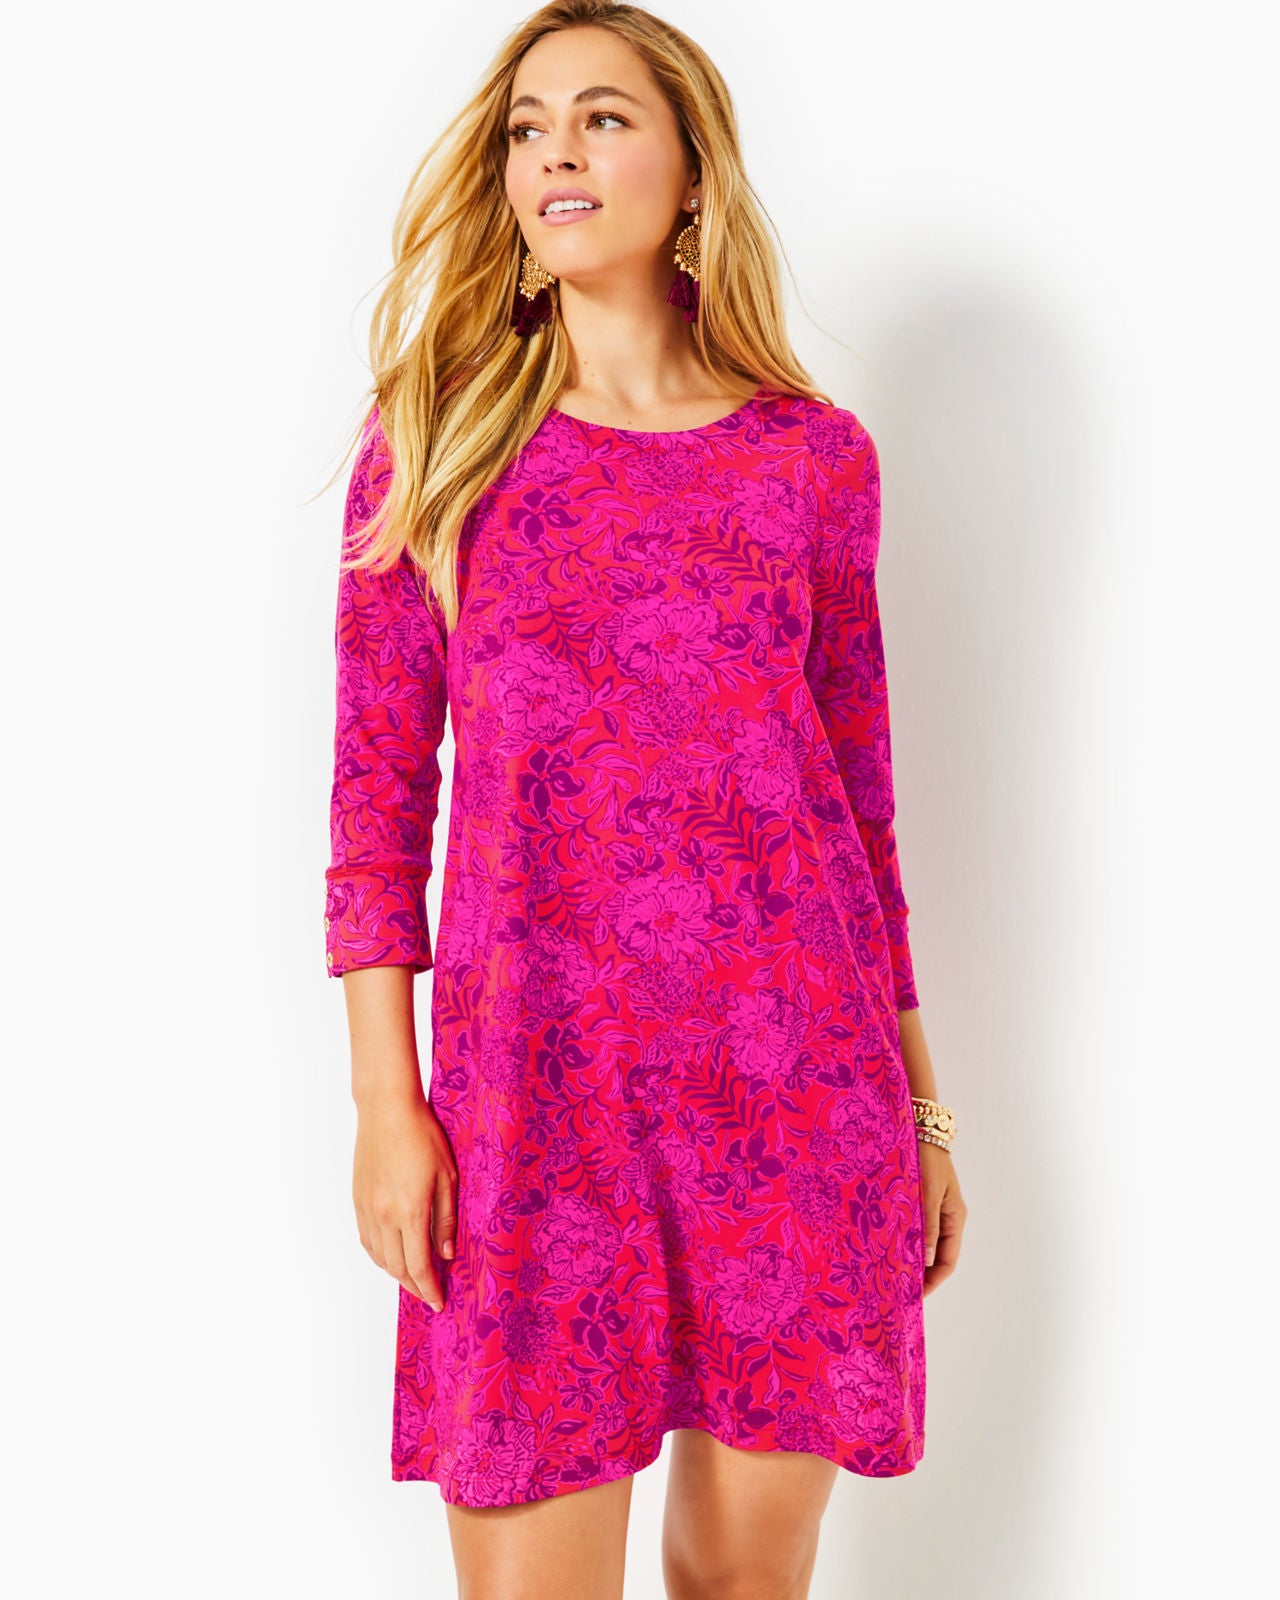 Solia Chilly Lilly UPF 50+ Dress